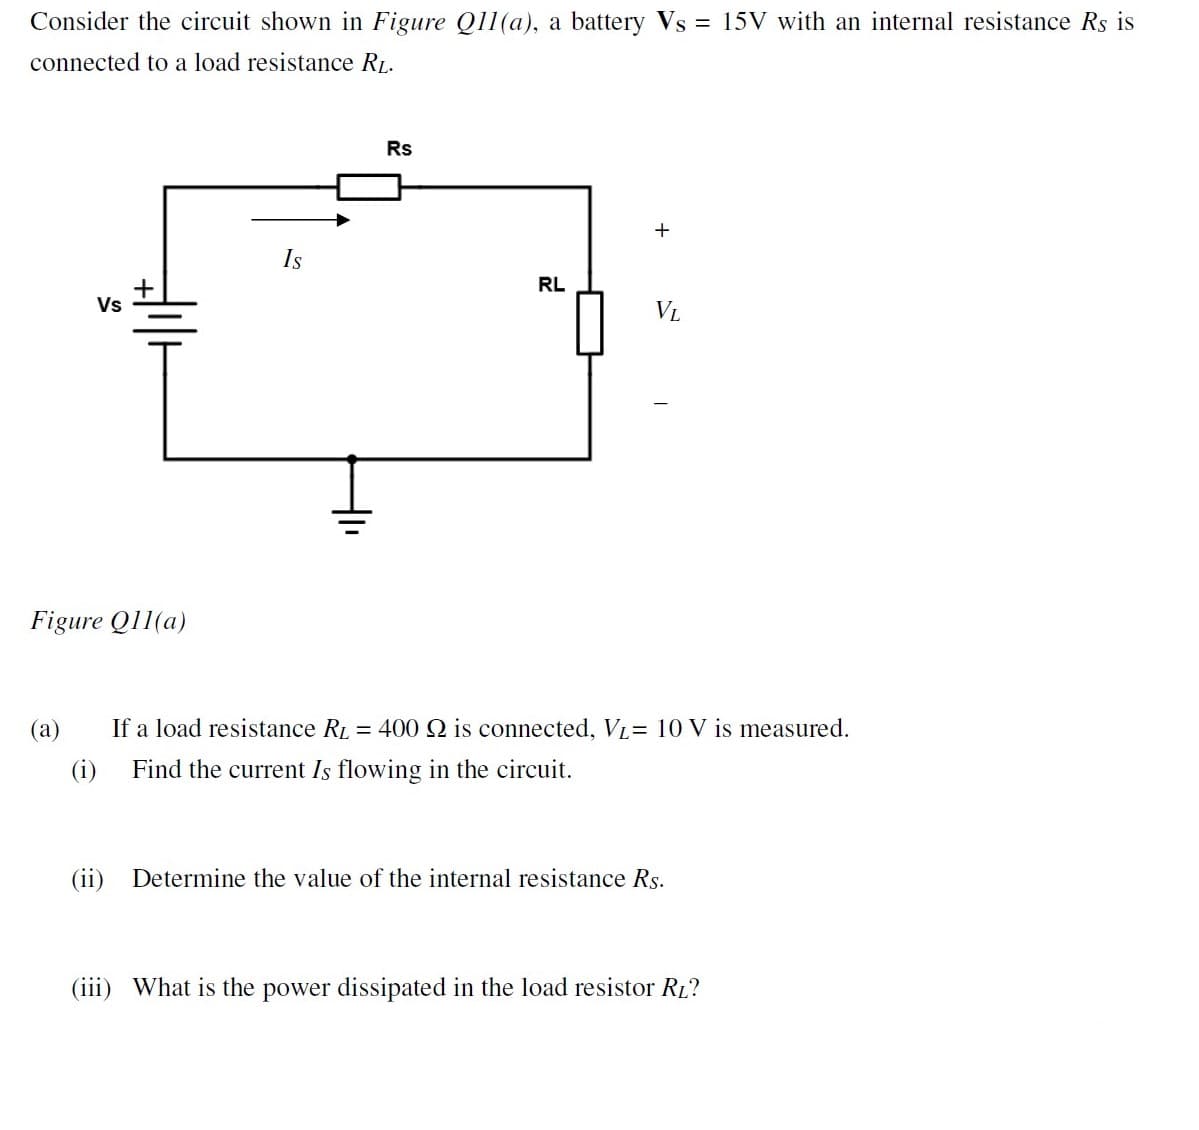 Consider the circuit shown in Figure Q11(a), a battery Vs = 15V with an internal resistance Rs is
connected to a load resistance RL.
Rs
+
Is
RL
Vs
VL
Figure Q11(a)
(a)
If a load resistance RL = 400 Q is connected, VL= 10 V is measured.
(i)
Find the current Is flowing in the circuit.
(ii) Determine the value of the internal resistance Rs.
(iii) What is the power dissipated in the load resistor RL?